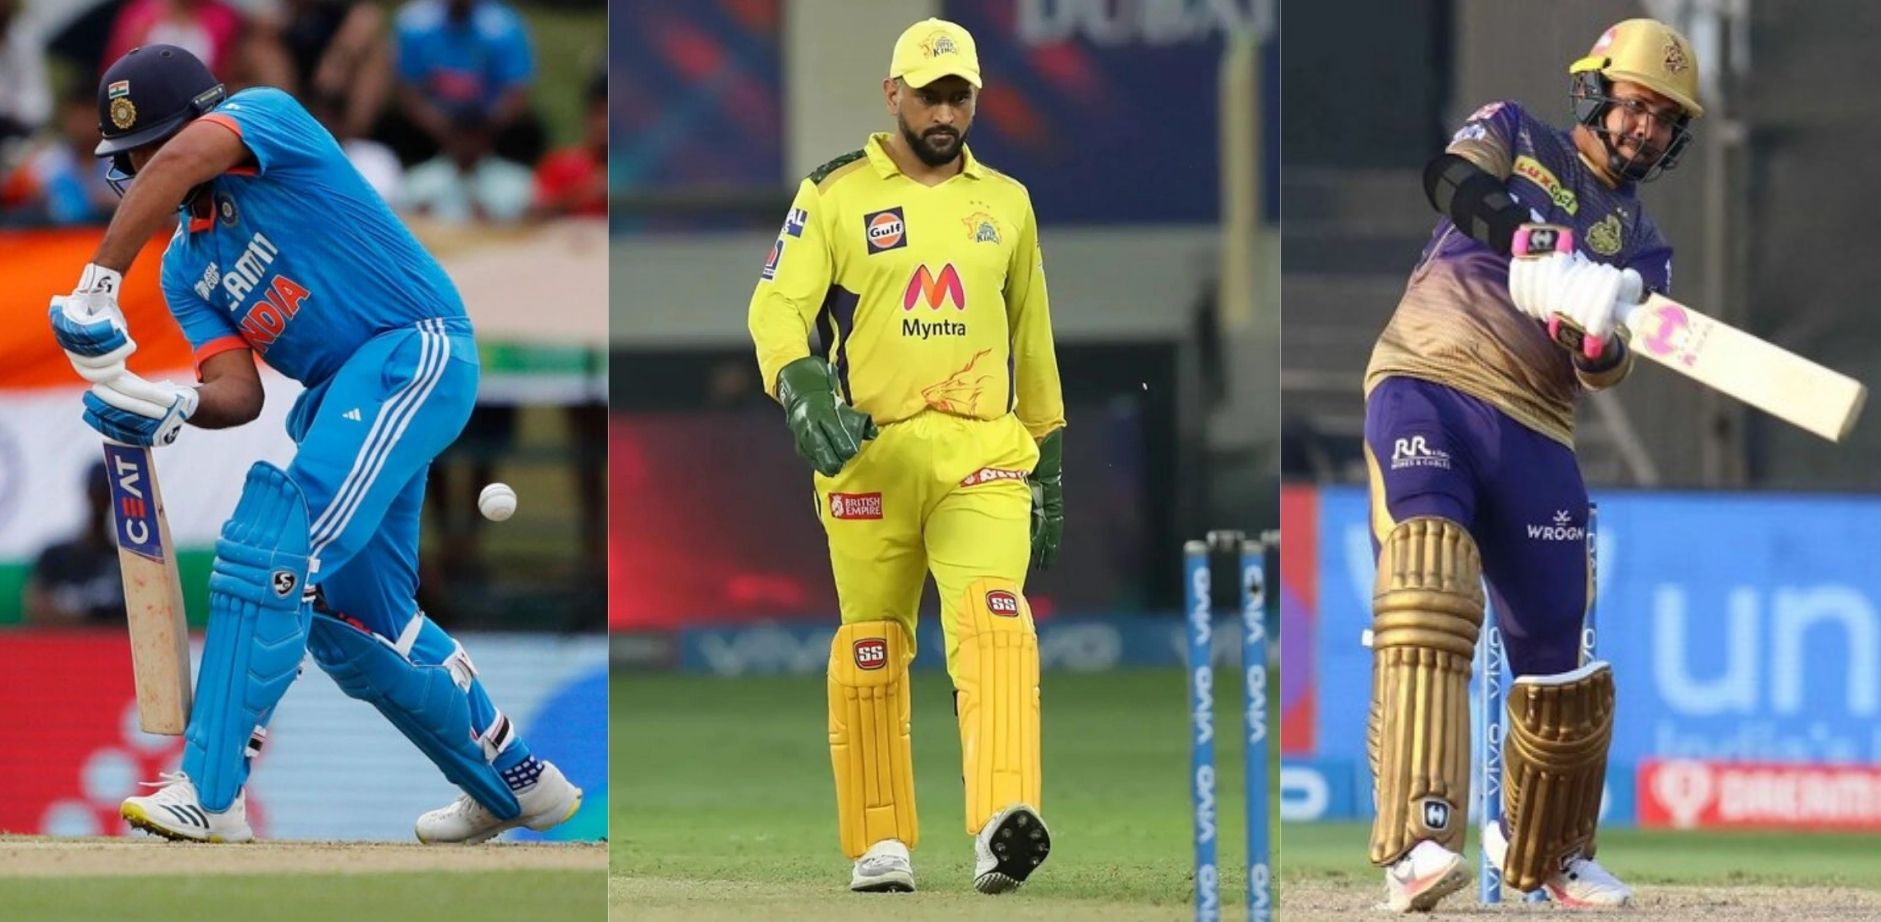 Who is the greatest IPL player of all times discussion